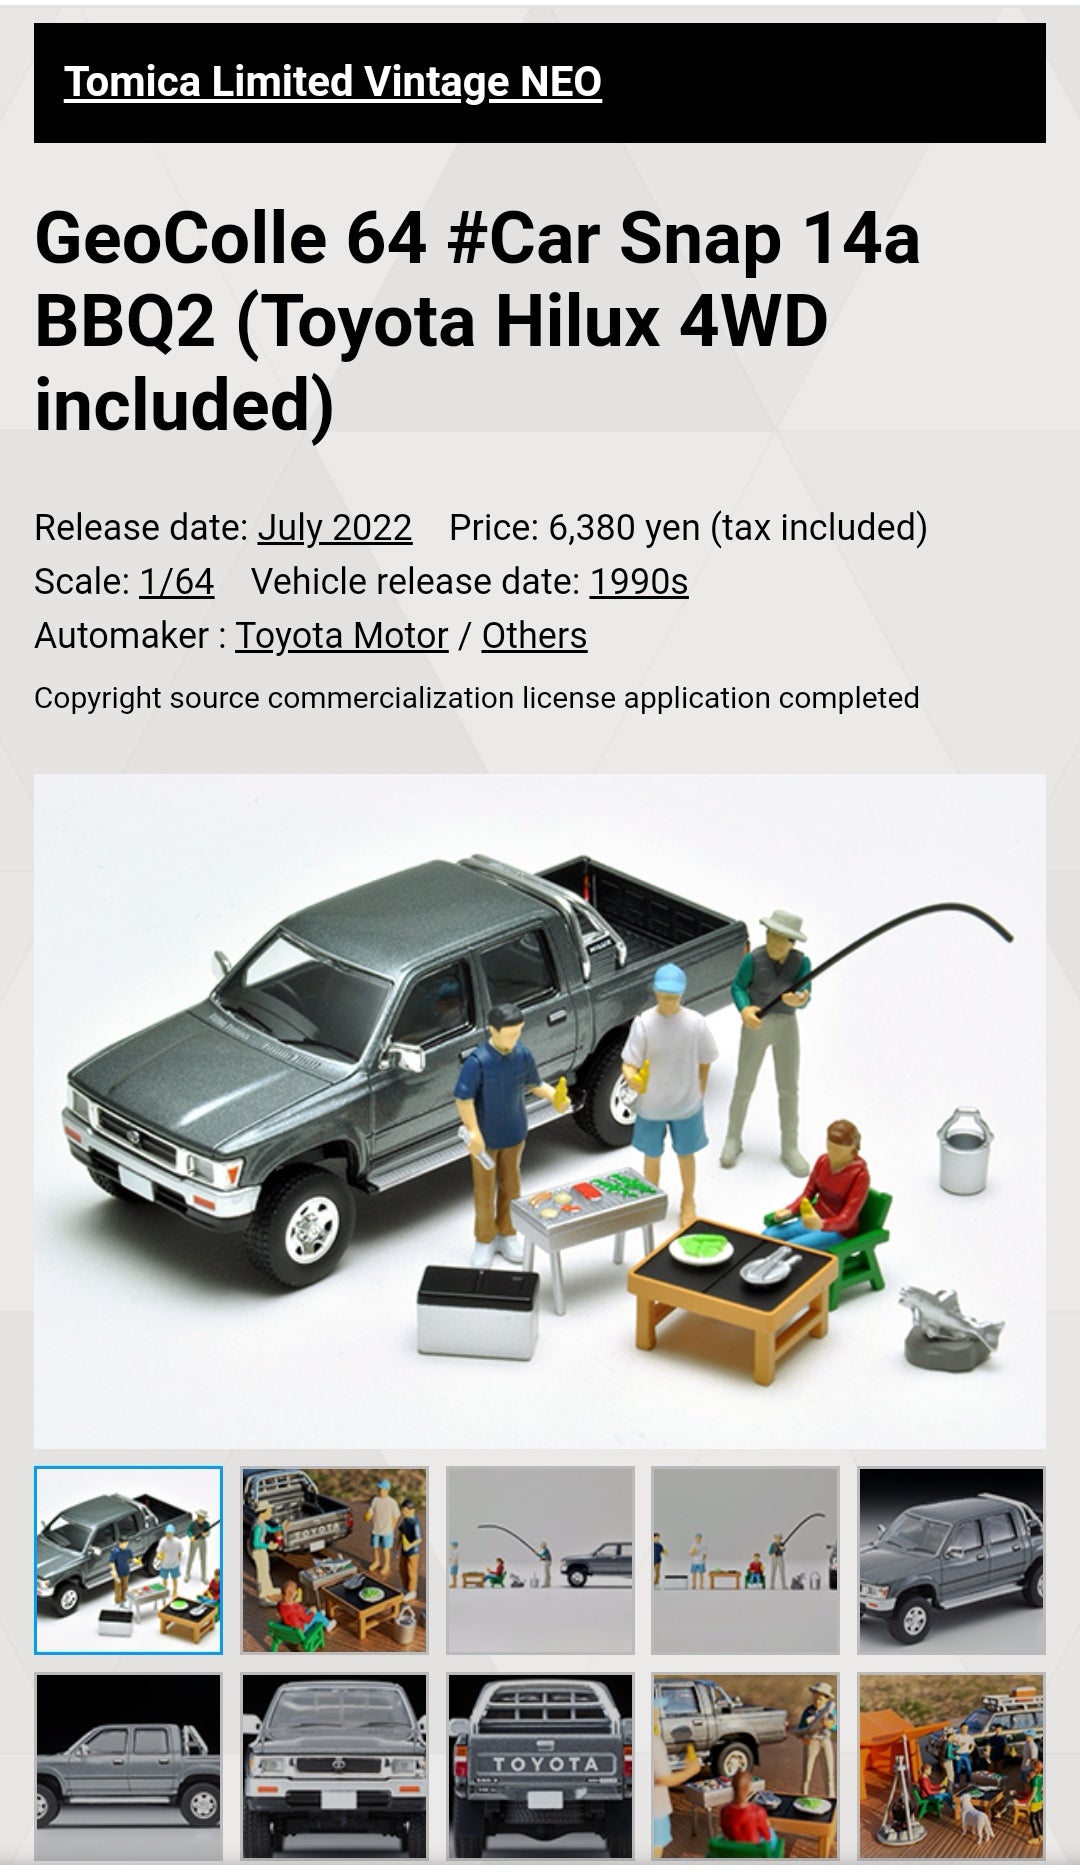 Tomica Limited Vintage Neo Diocolle 64 #Car Snap 14a BBQ2 (Toyota Hilux 4WD included) Takara Tomy